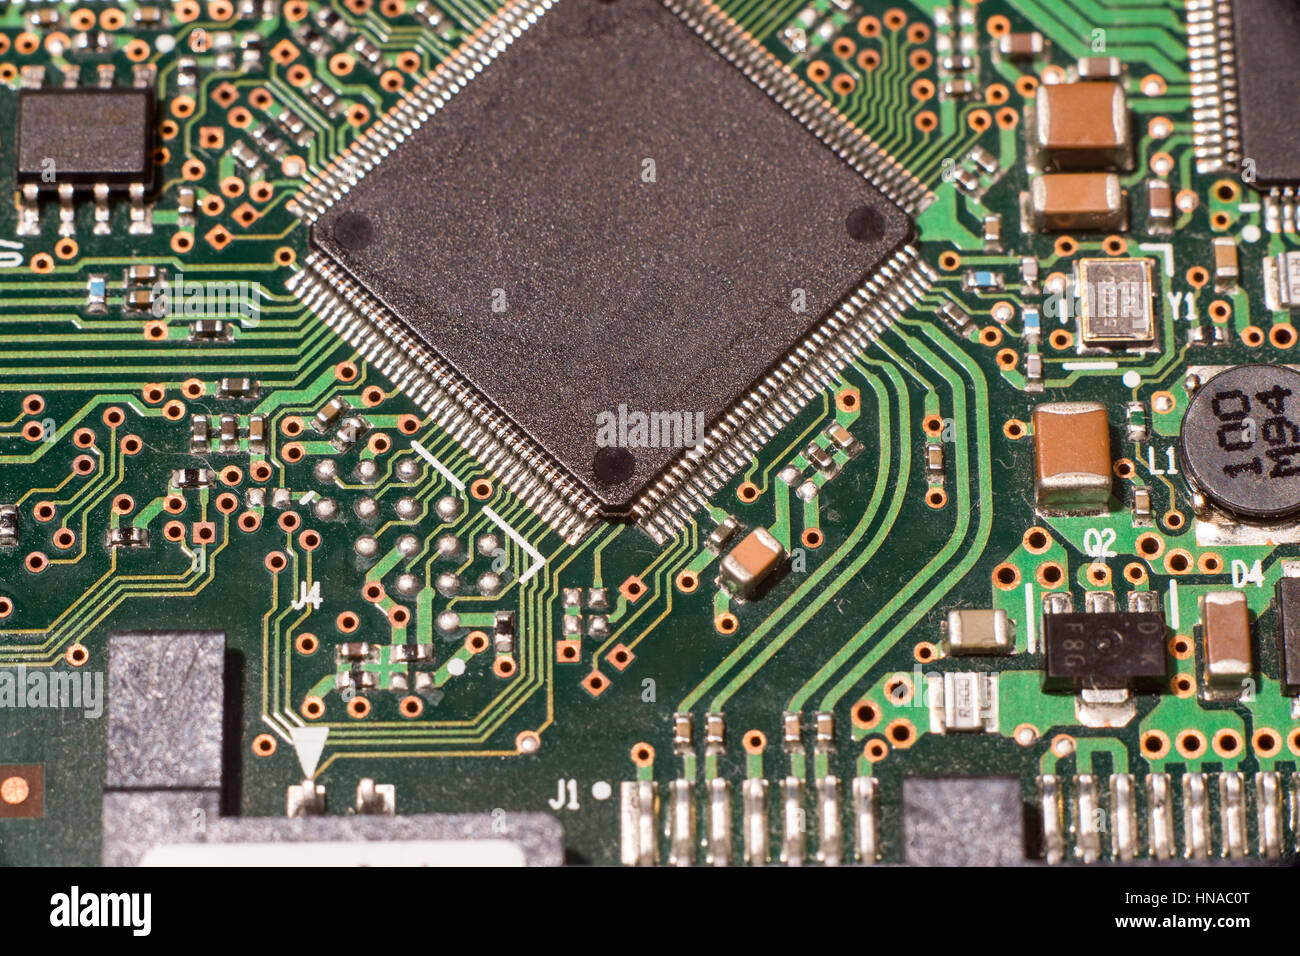 Close up of electronic circuit board with microchip and components Stock Photo